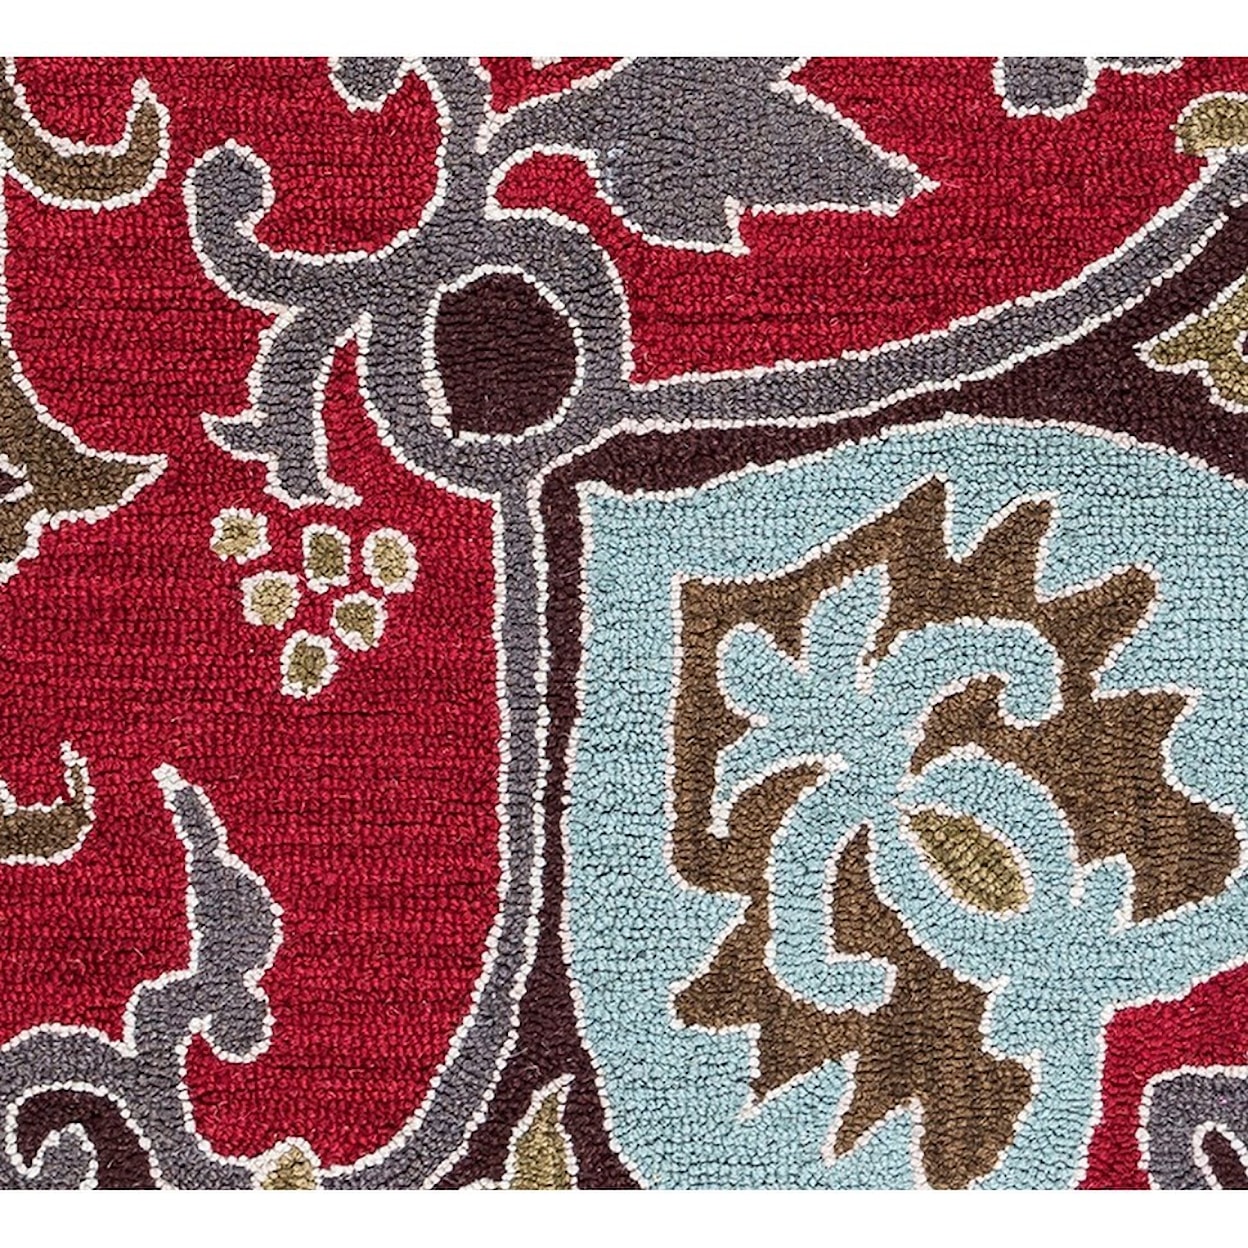 Rizzy Home Country 2' x 3' Rectangle Rug